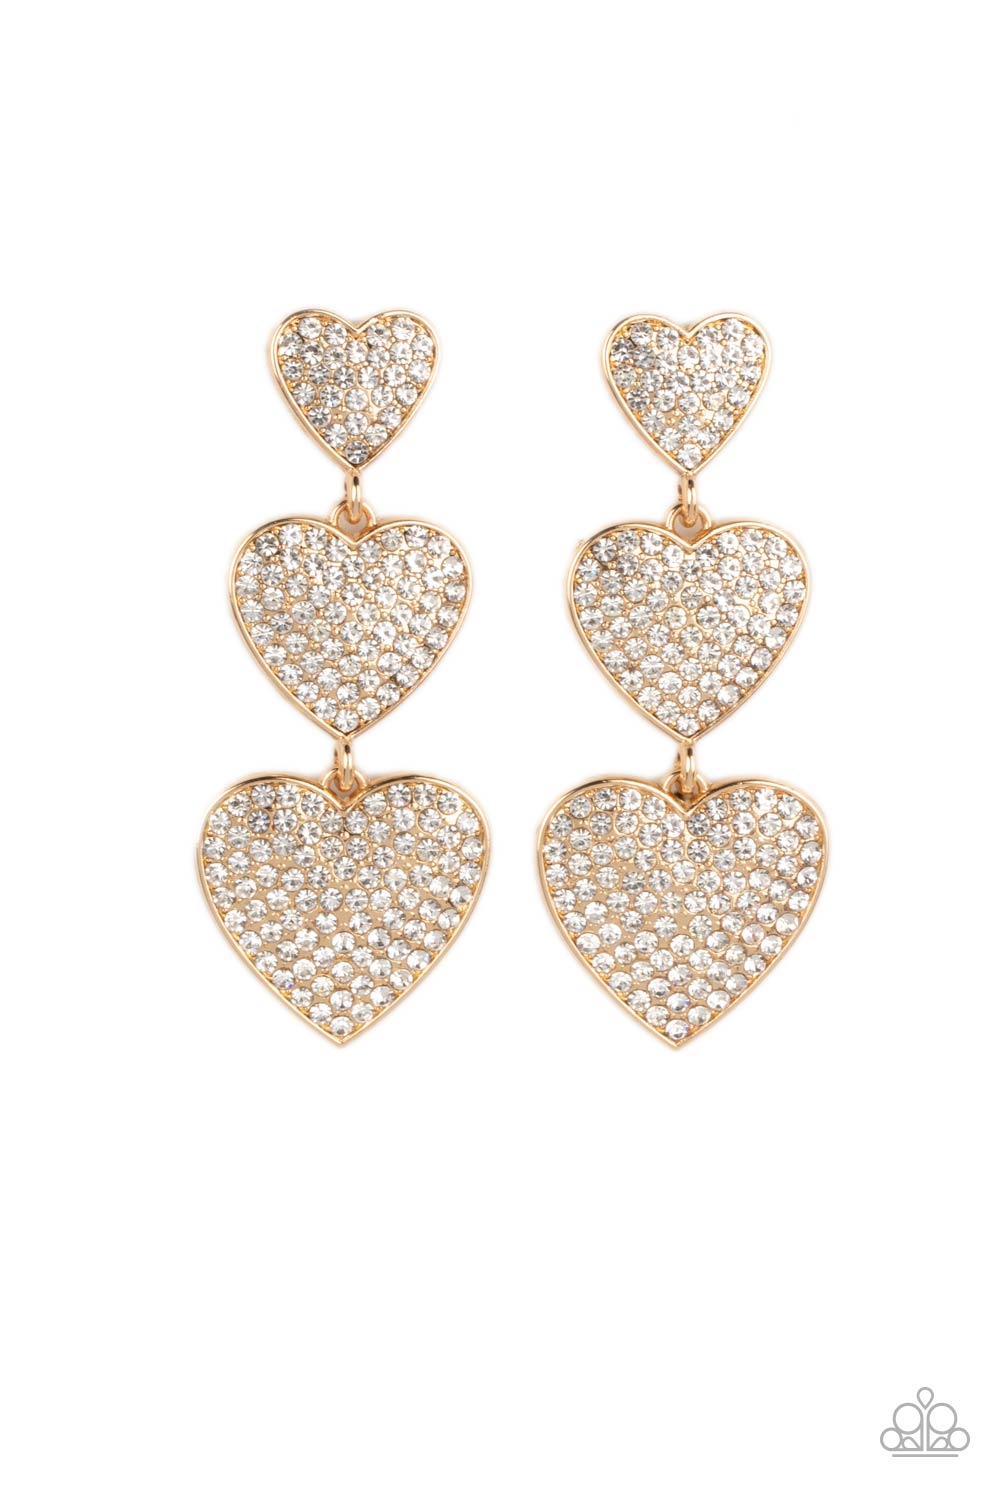 Couples Retreat Gold &amp; White Rhinestone Heart Earrings - Paparazzi Accessories- lightbox - CarasShop.com - $5 Jewelry by Cara Jewels